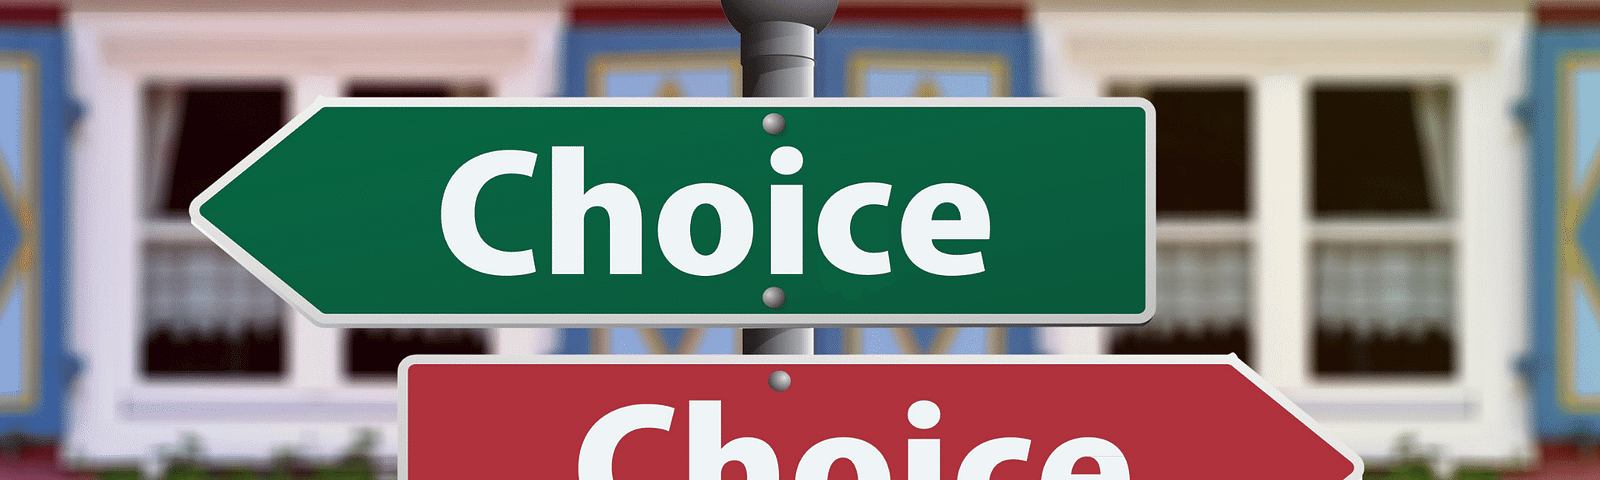 A sign post with two signs, both saying “choice”. One sign points left and the other points right.